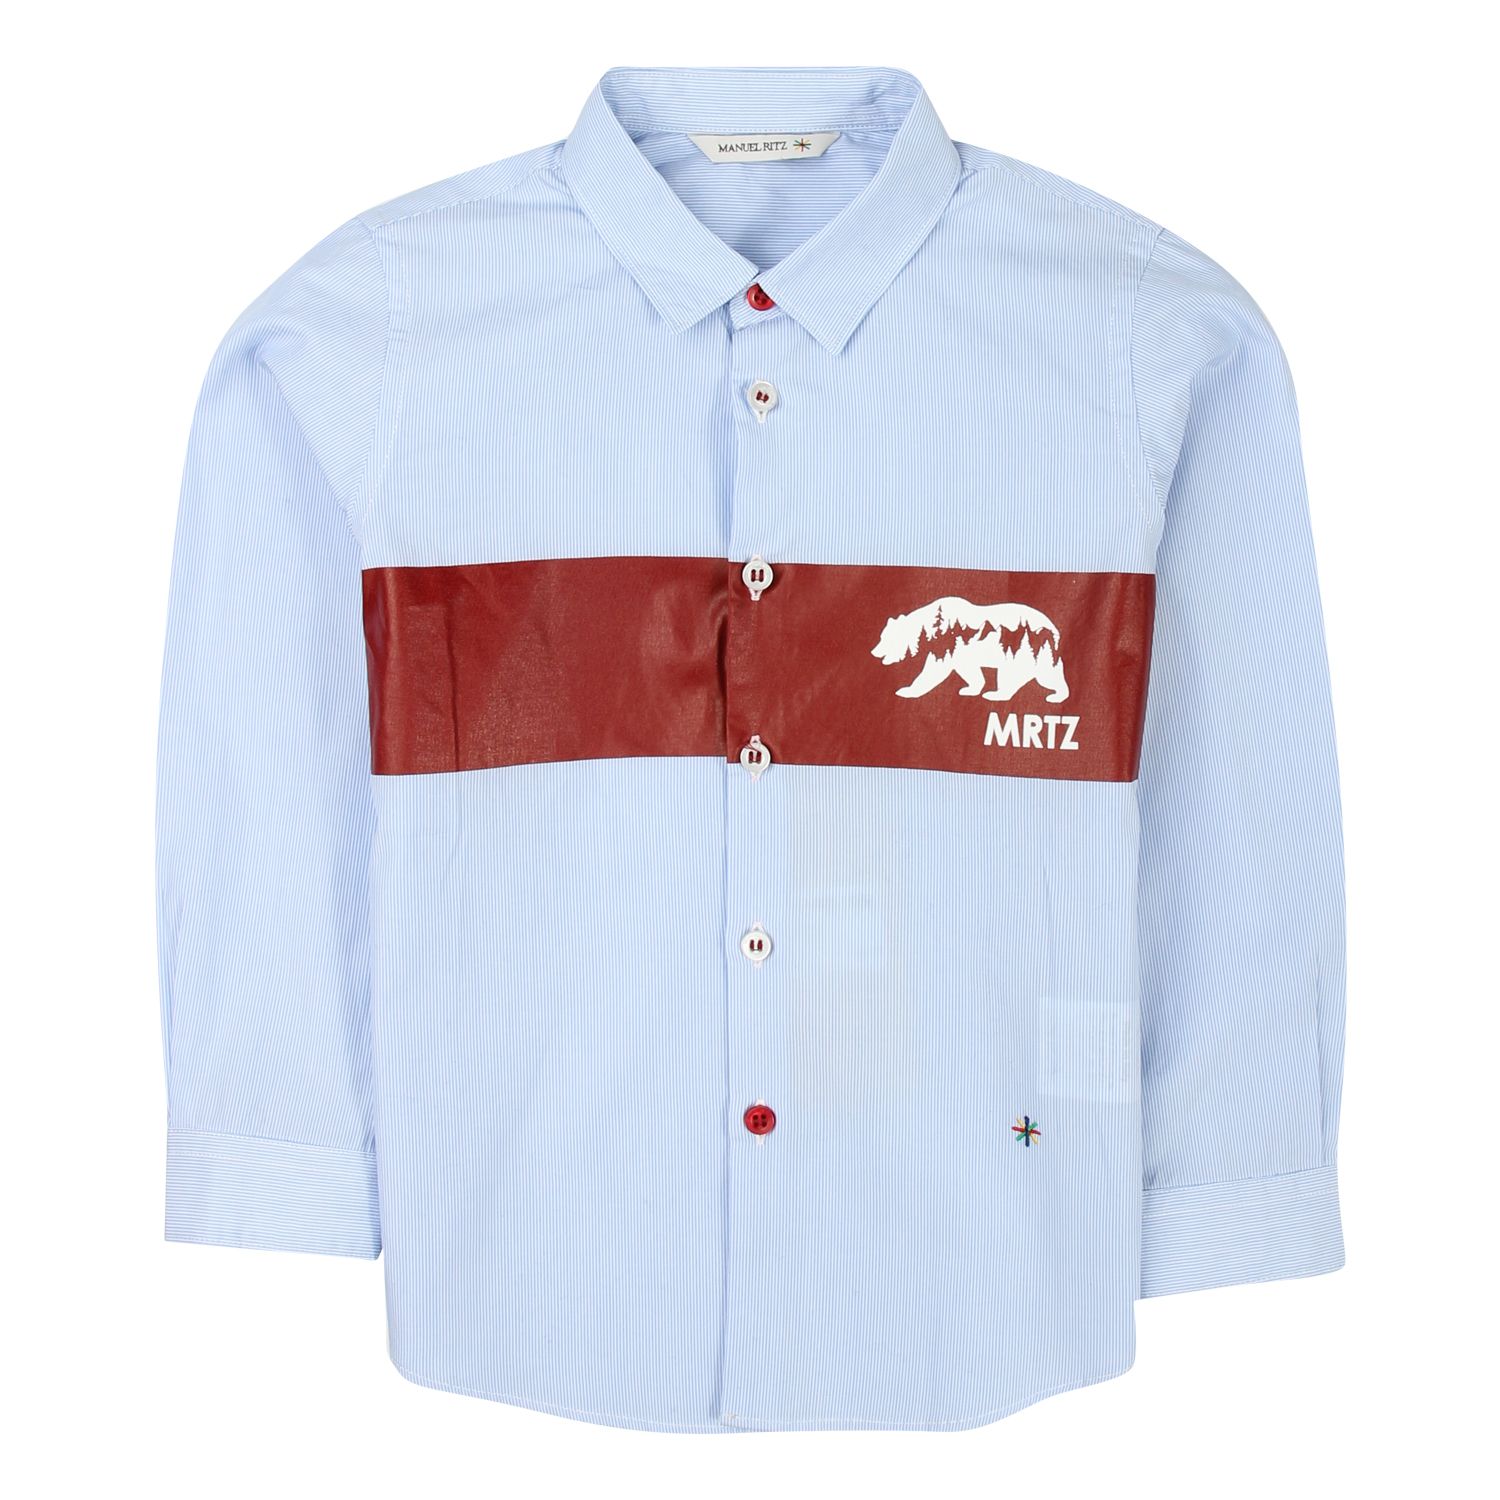 Manuel Ritz light blue shirt -Details of long-sleeved shirt, buttoned cuffs, classic collar, blue and white striped, front with burgundy logo print, central closure -Washing max 30 °